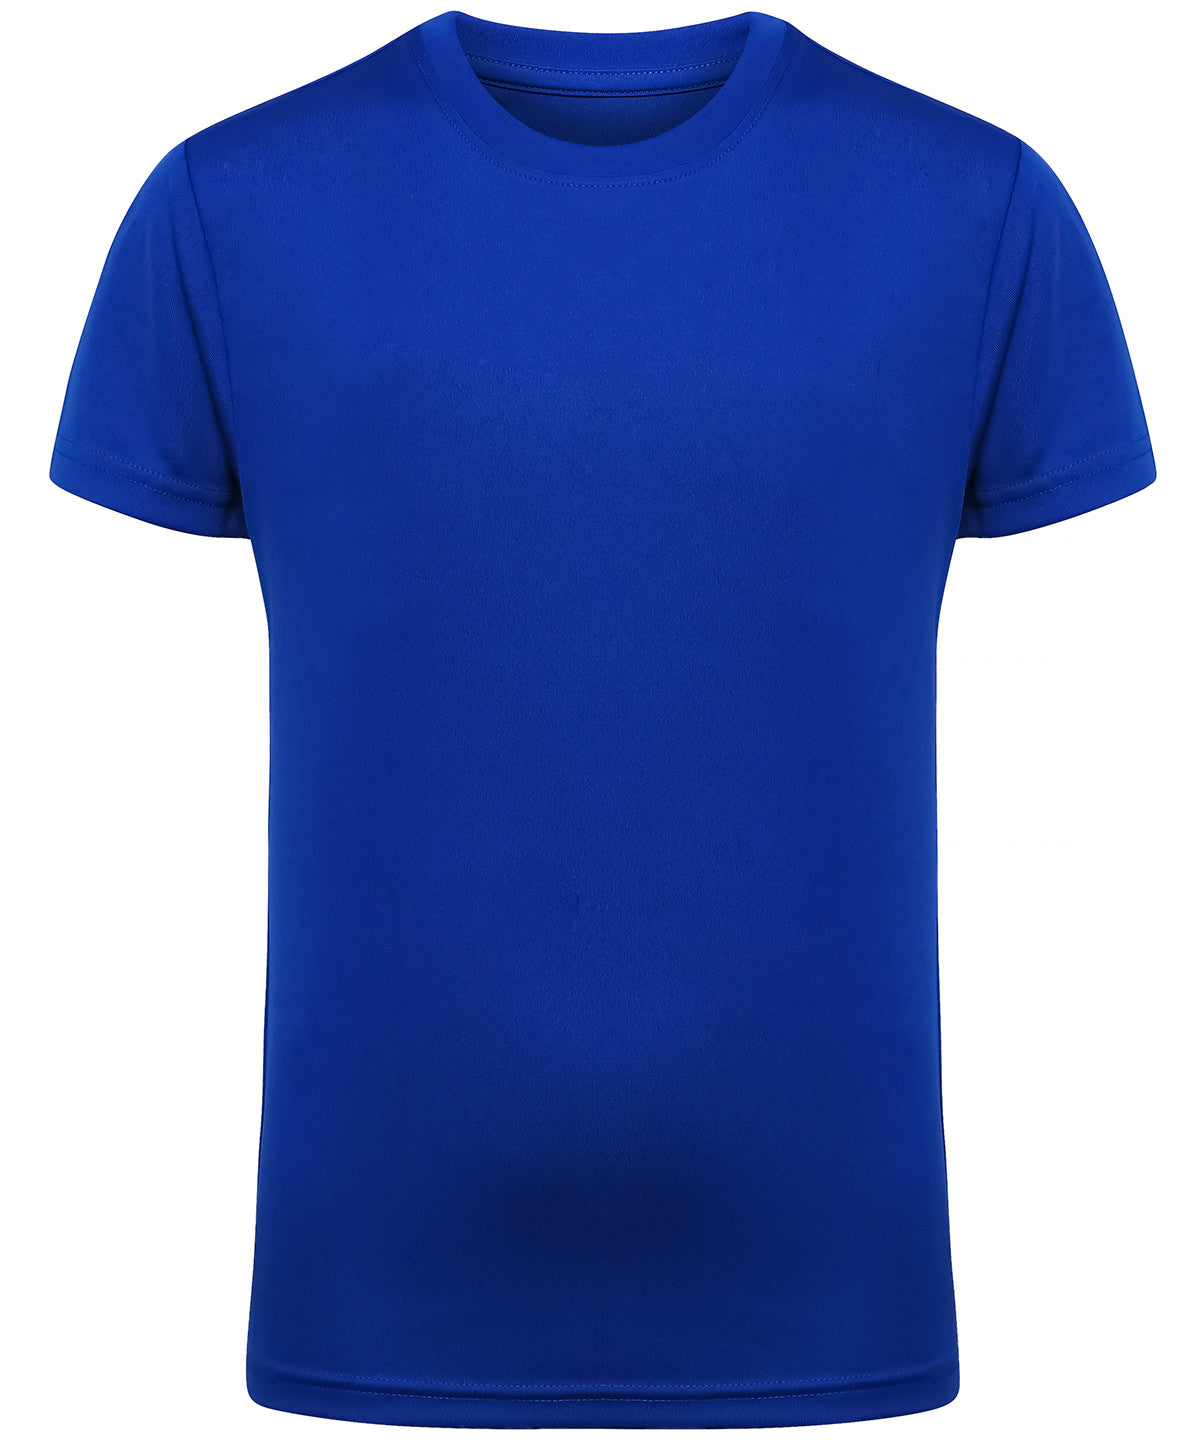 Royal - Kids TriDri® performance t-shirt T-Shirts TriDri® Activewear & Performance, Exclusives, Junior, Must Haves, Sports & Leisure, T-Shirts & Vests Schoolwear Centres